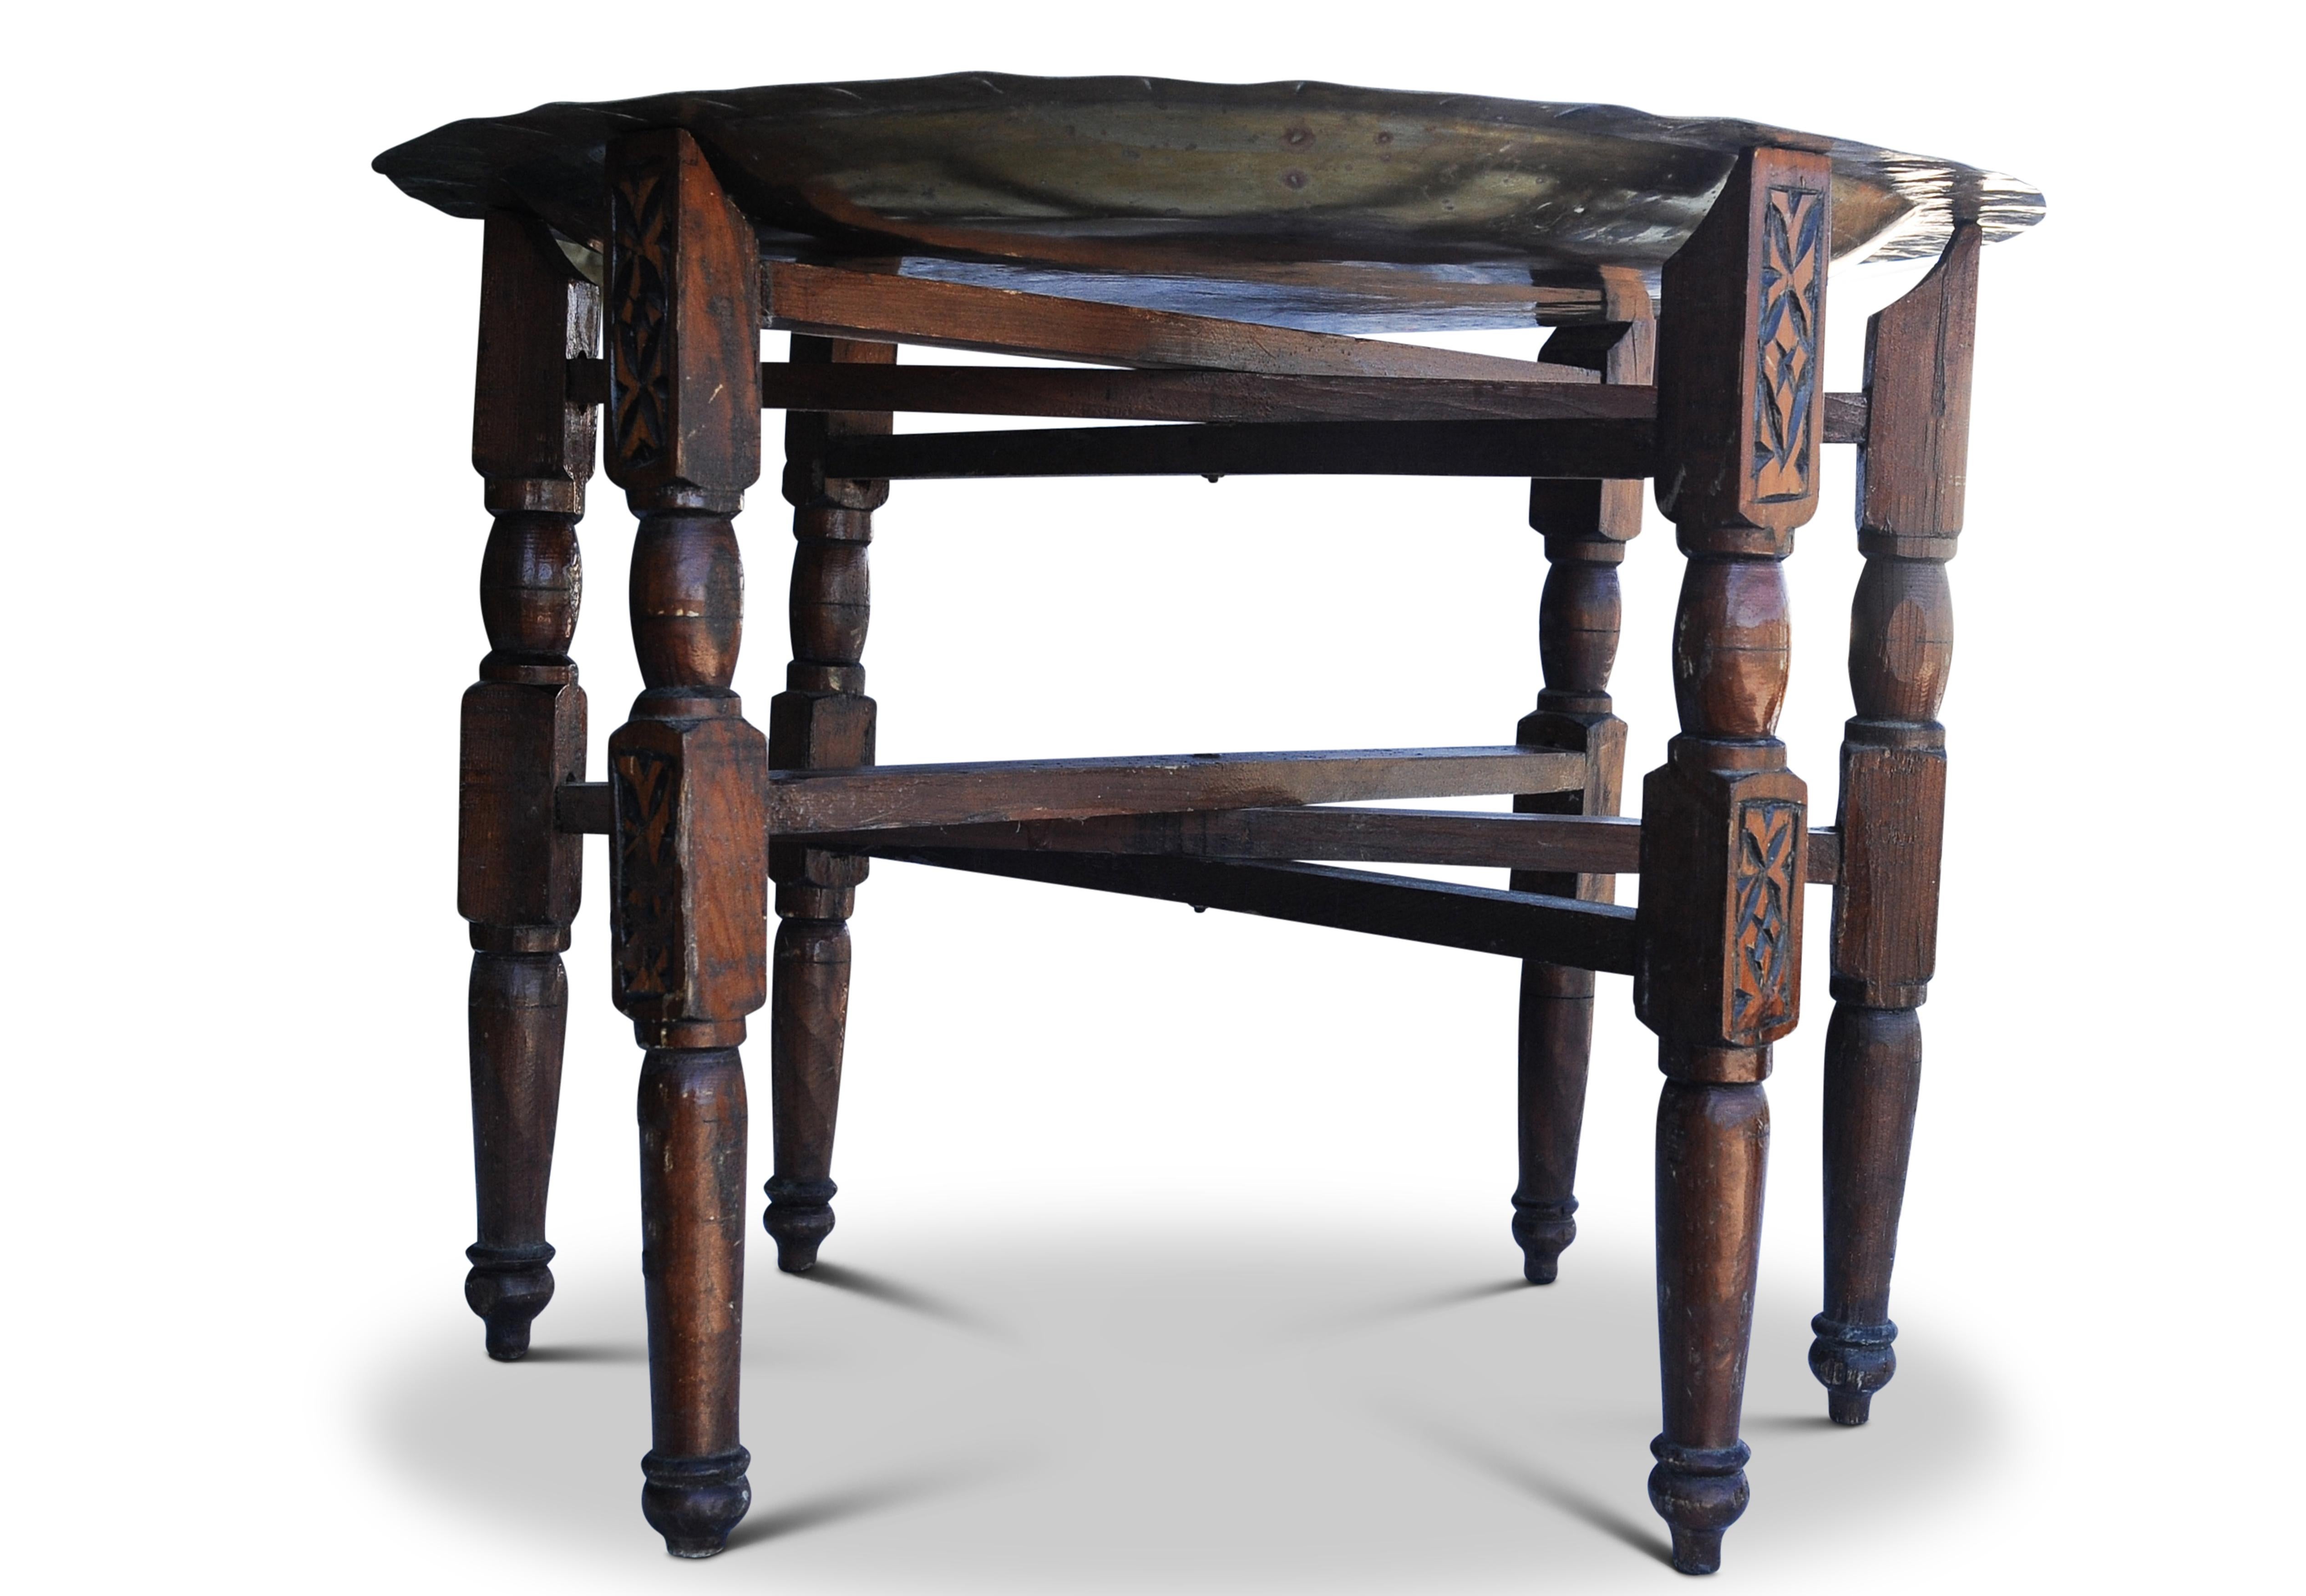 Moorish 19th Century Brass And Hardwood Tea Table Decorated With Decorative Top For Sale